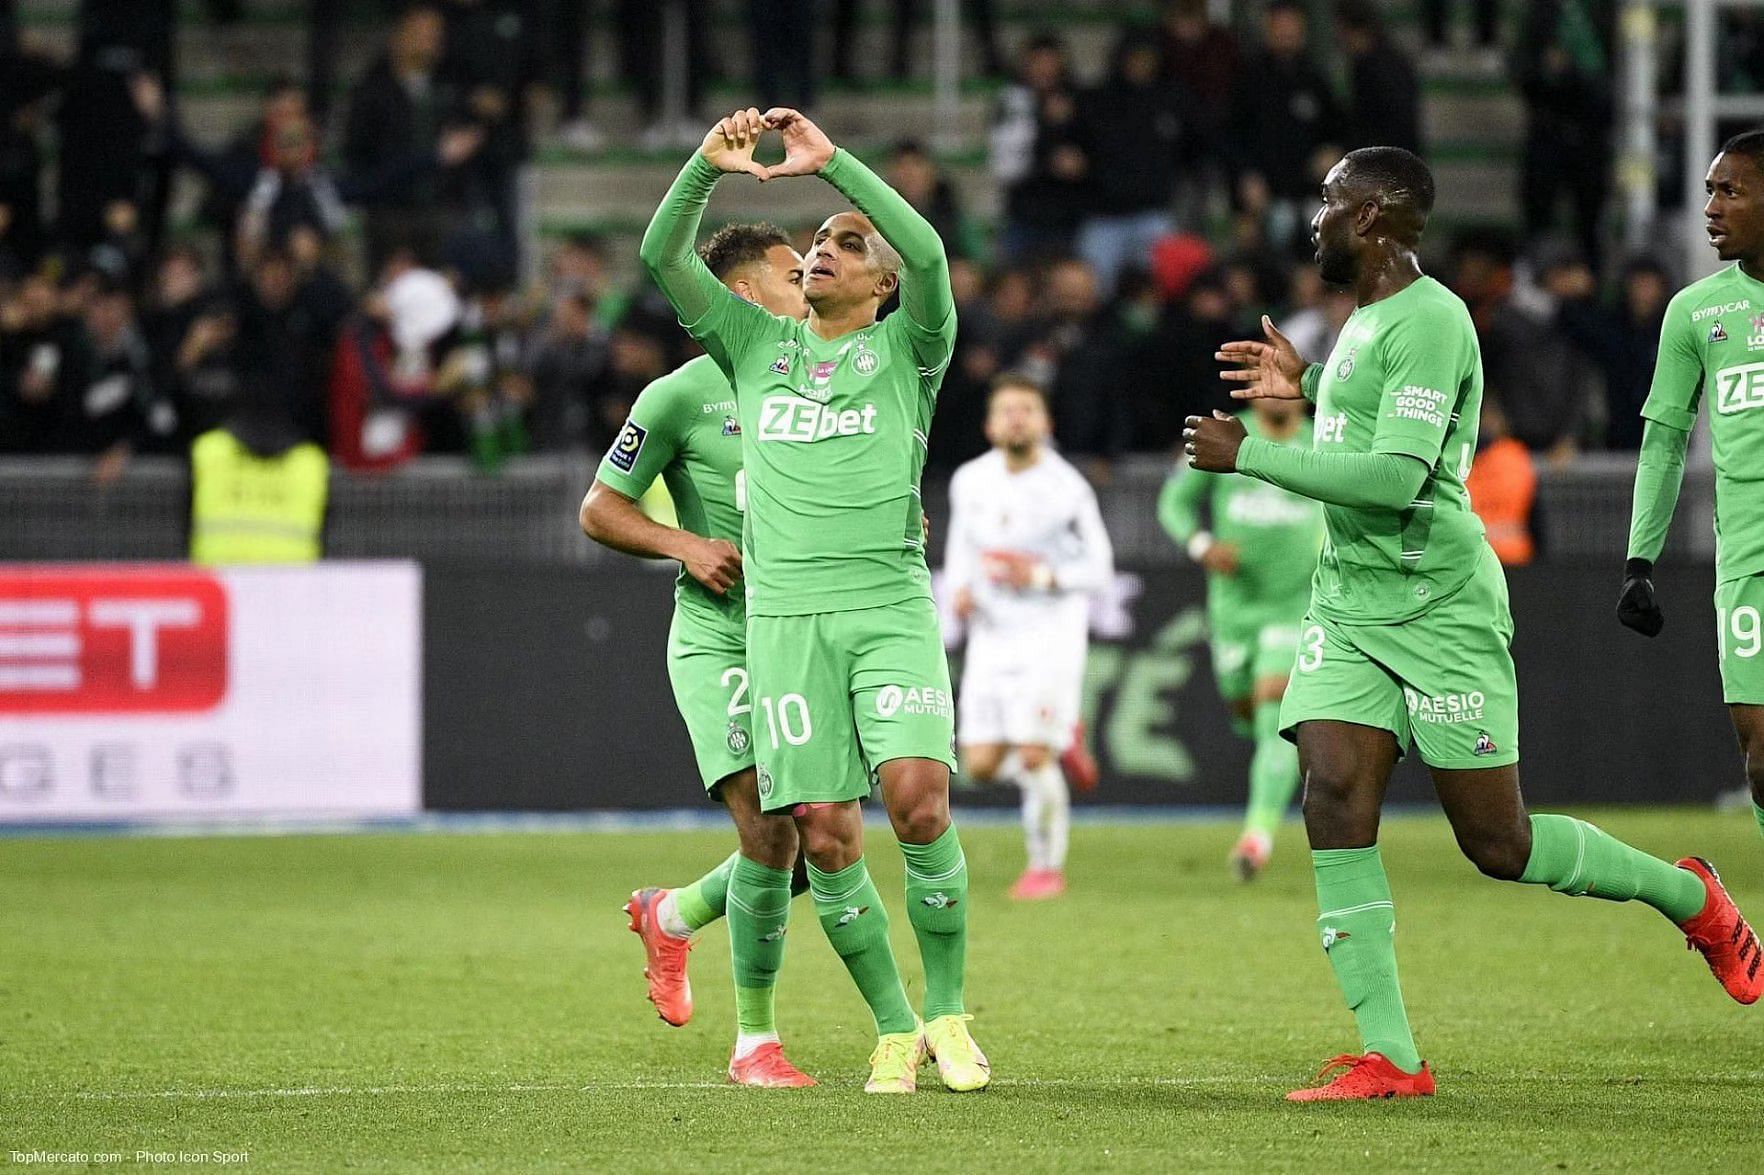 Saint-Etienne will host Troyes on Friday - Ligue 1